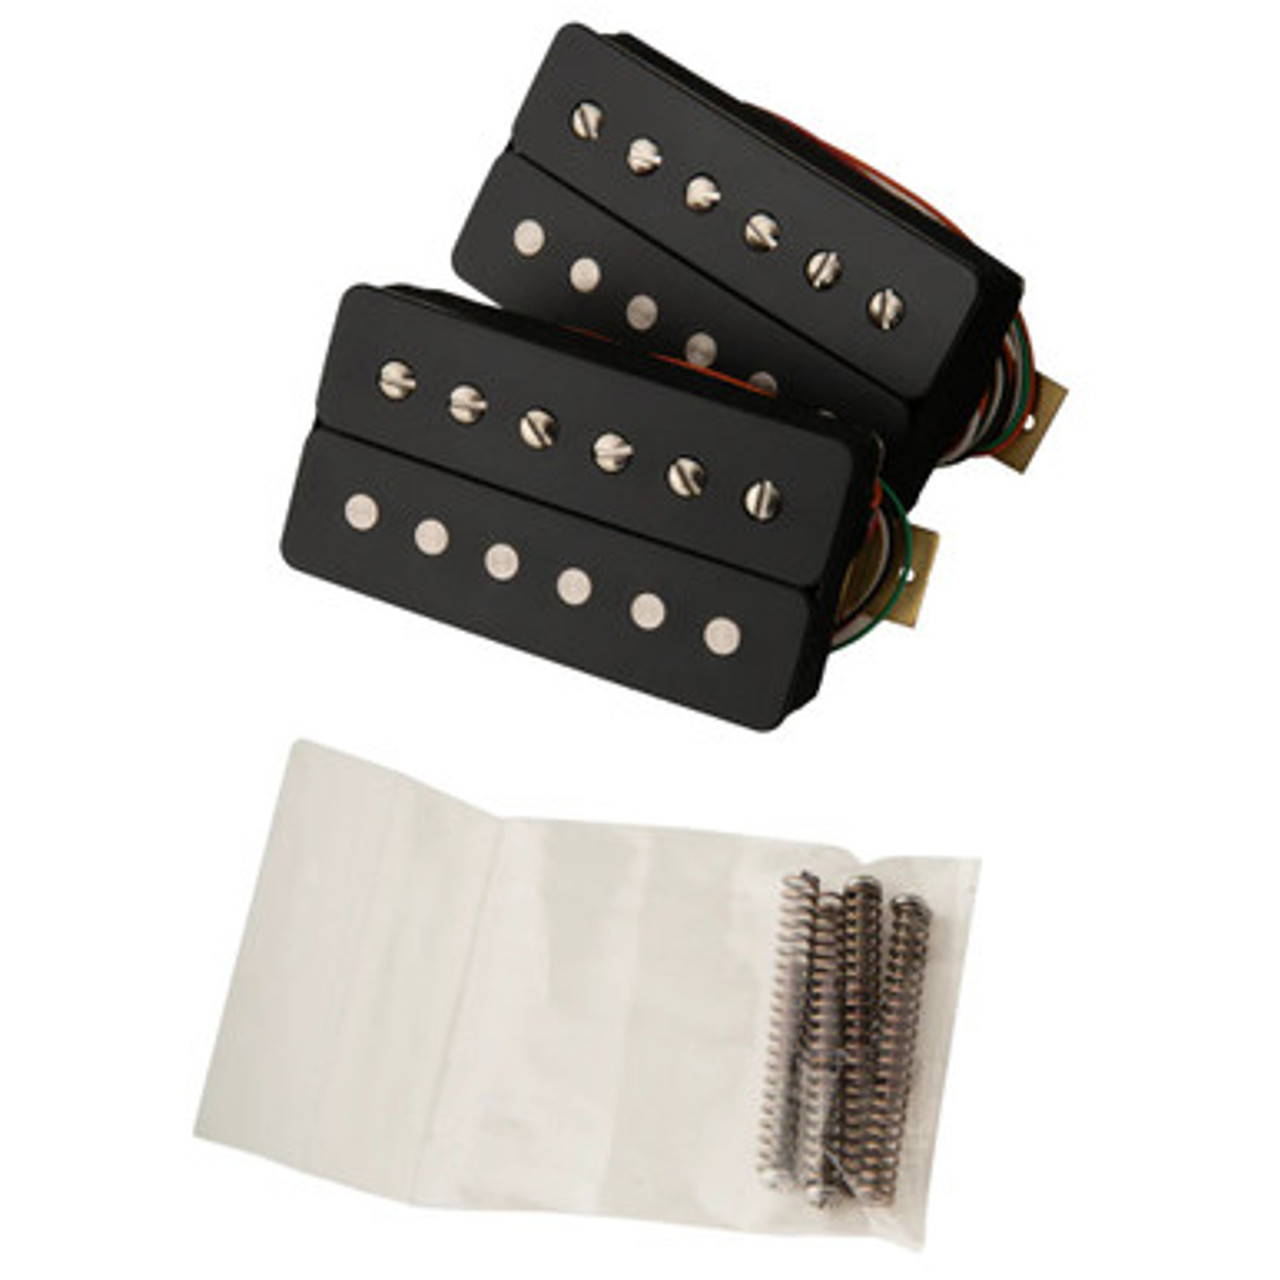 PRS 85/15 Limited Edition Pickup Set with Uncovered Bobbins